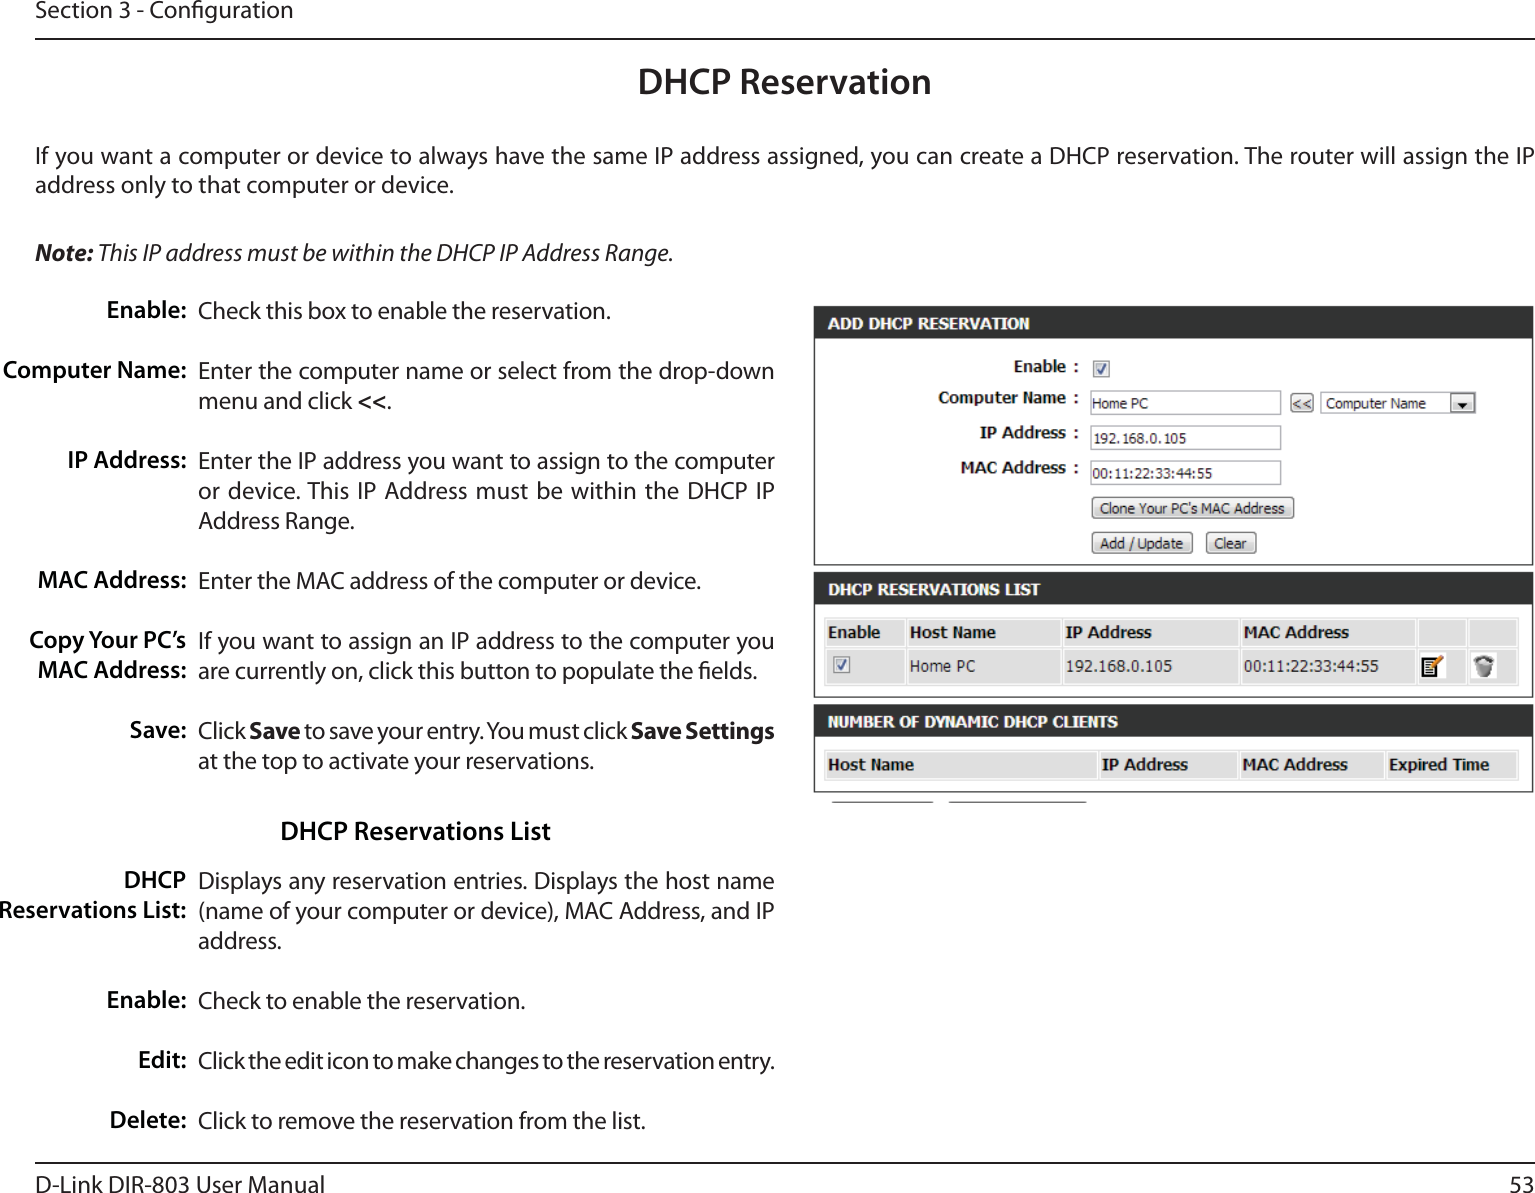 53D-Link DIR-803 User ManualSection 3 - CongurationDHCP ReservationIf you want a computer or device to always have the same IP address assigned, you can create a DHCP reservation. The router will assign the IP address only to that computer or device. Note: This IP address must be within the DHCP IP Address Range.Check this box to enable the reservation.Enter the computer name or select from the drop-down menu and click &lt;&lt;.Enter the IP address you want to assign to the computer or device. This IP Address must be within the DHCP IP Address Range.Enter the MAC address of the computer or device.If you want to assign an IP address to the computer you are currently on, click this button to populate the elds. Click Save to save your entry. You must click Save Settings at the top to activate your reservations. Displays any reservation entries. Displays the host name (name of your computer or device), MAC Address, and IP address.Check to enable the reservation.Click the edit icon to make changes to the reservation entry.Click to remove the reservation from the list.Enable:Computer Name:IP Address:MAC Address:Copy Your PC’s MAC Address:Save:DHCP Reservations List:Enable:Edit:Delete:DHCP Reservations List